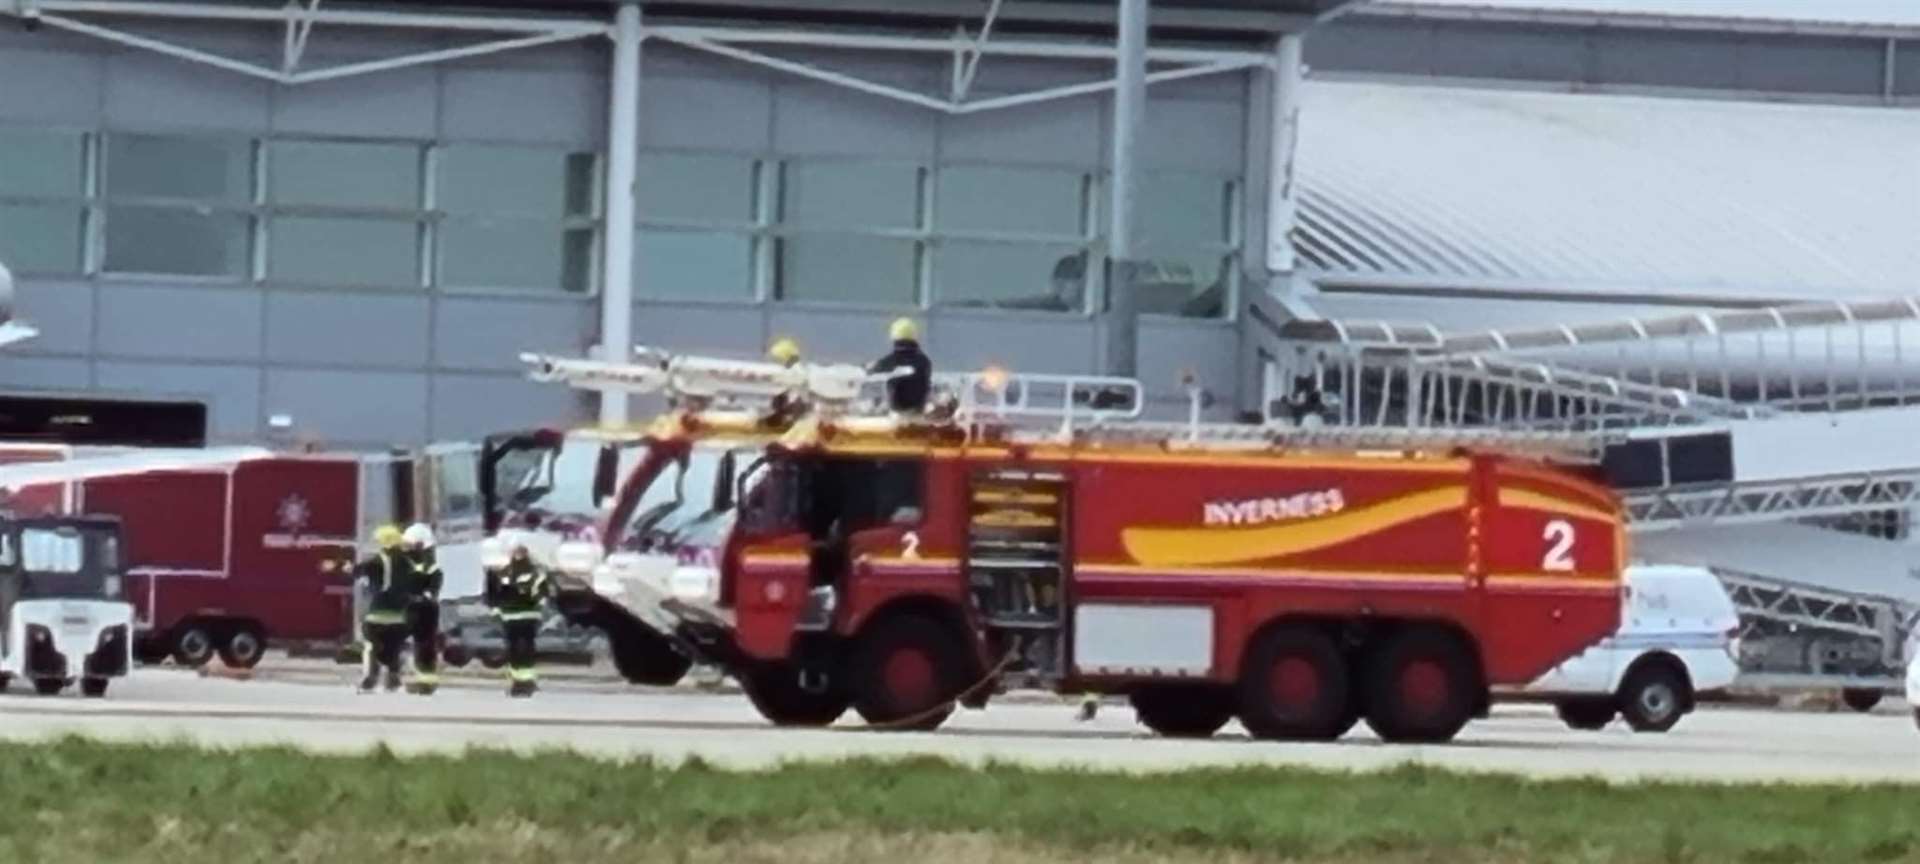 The incident at Inverness Airport.